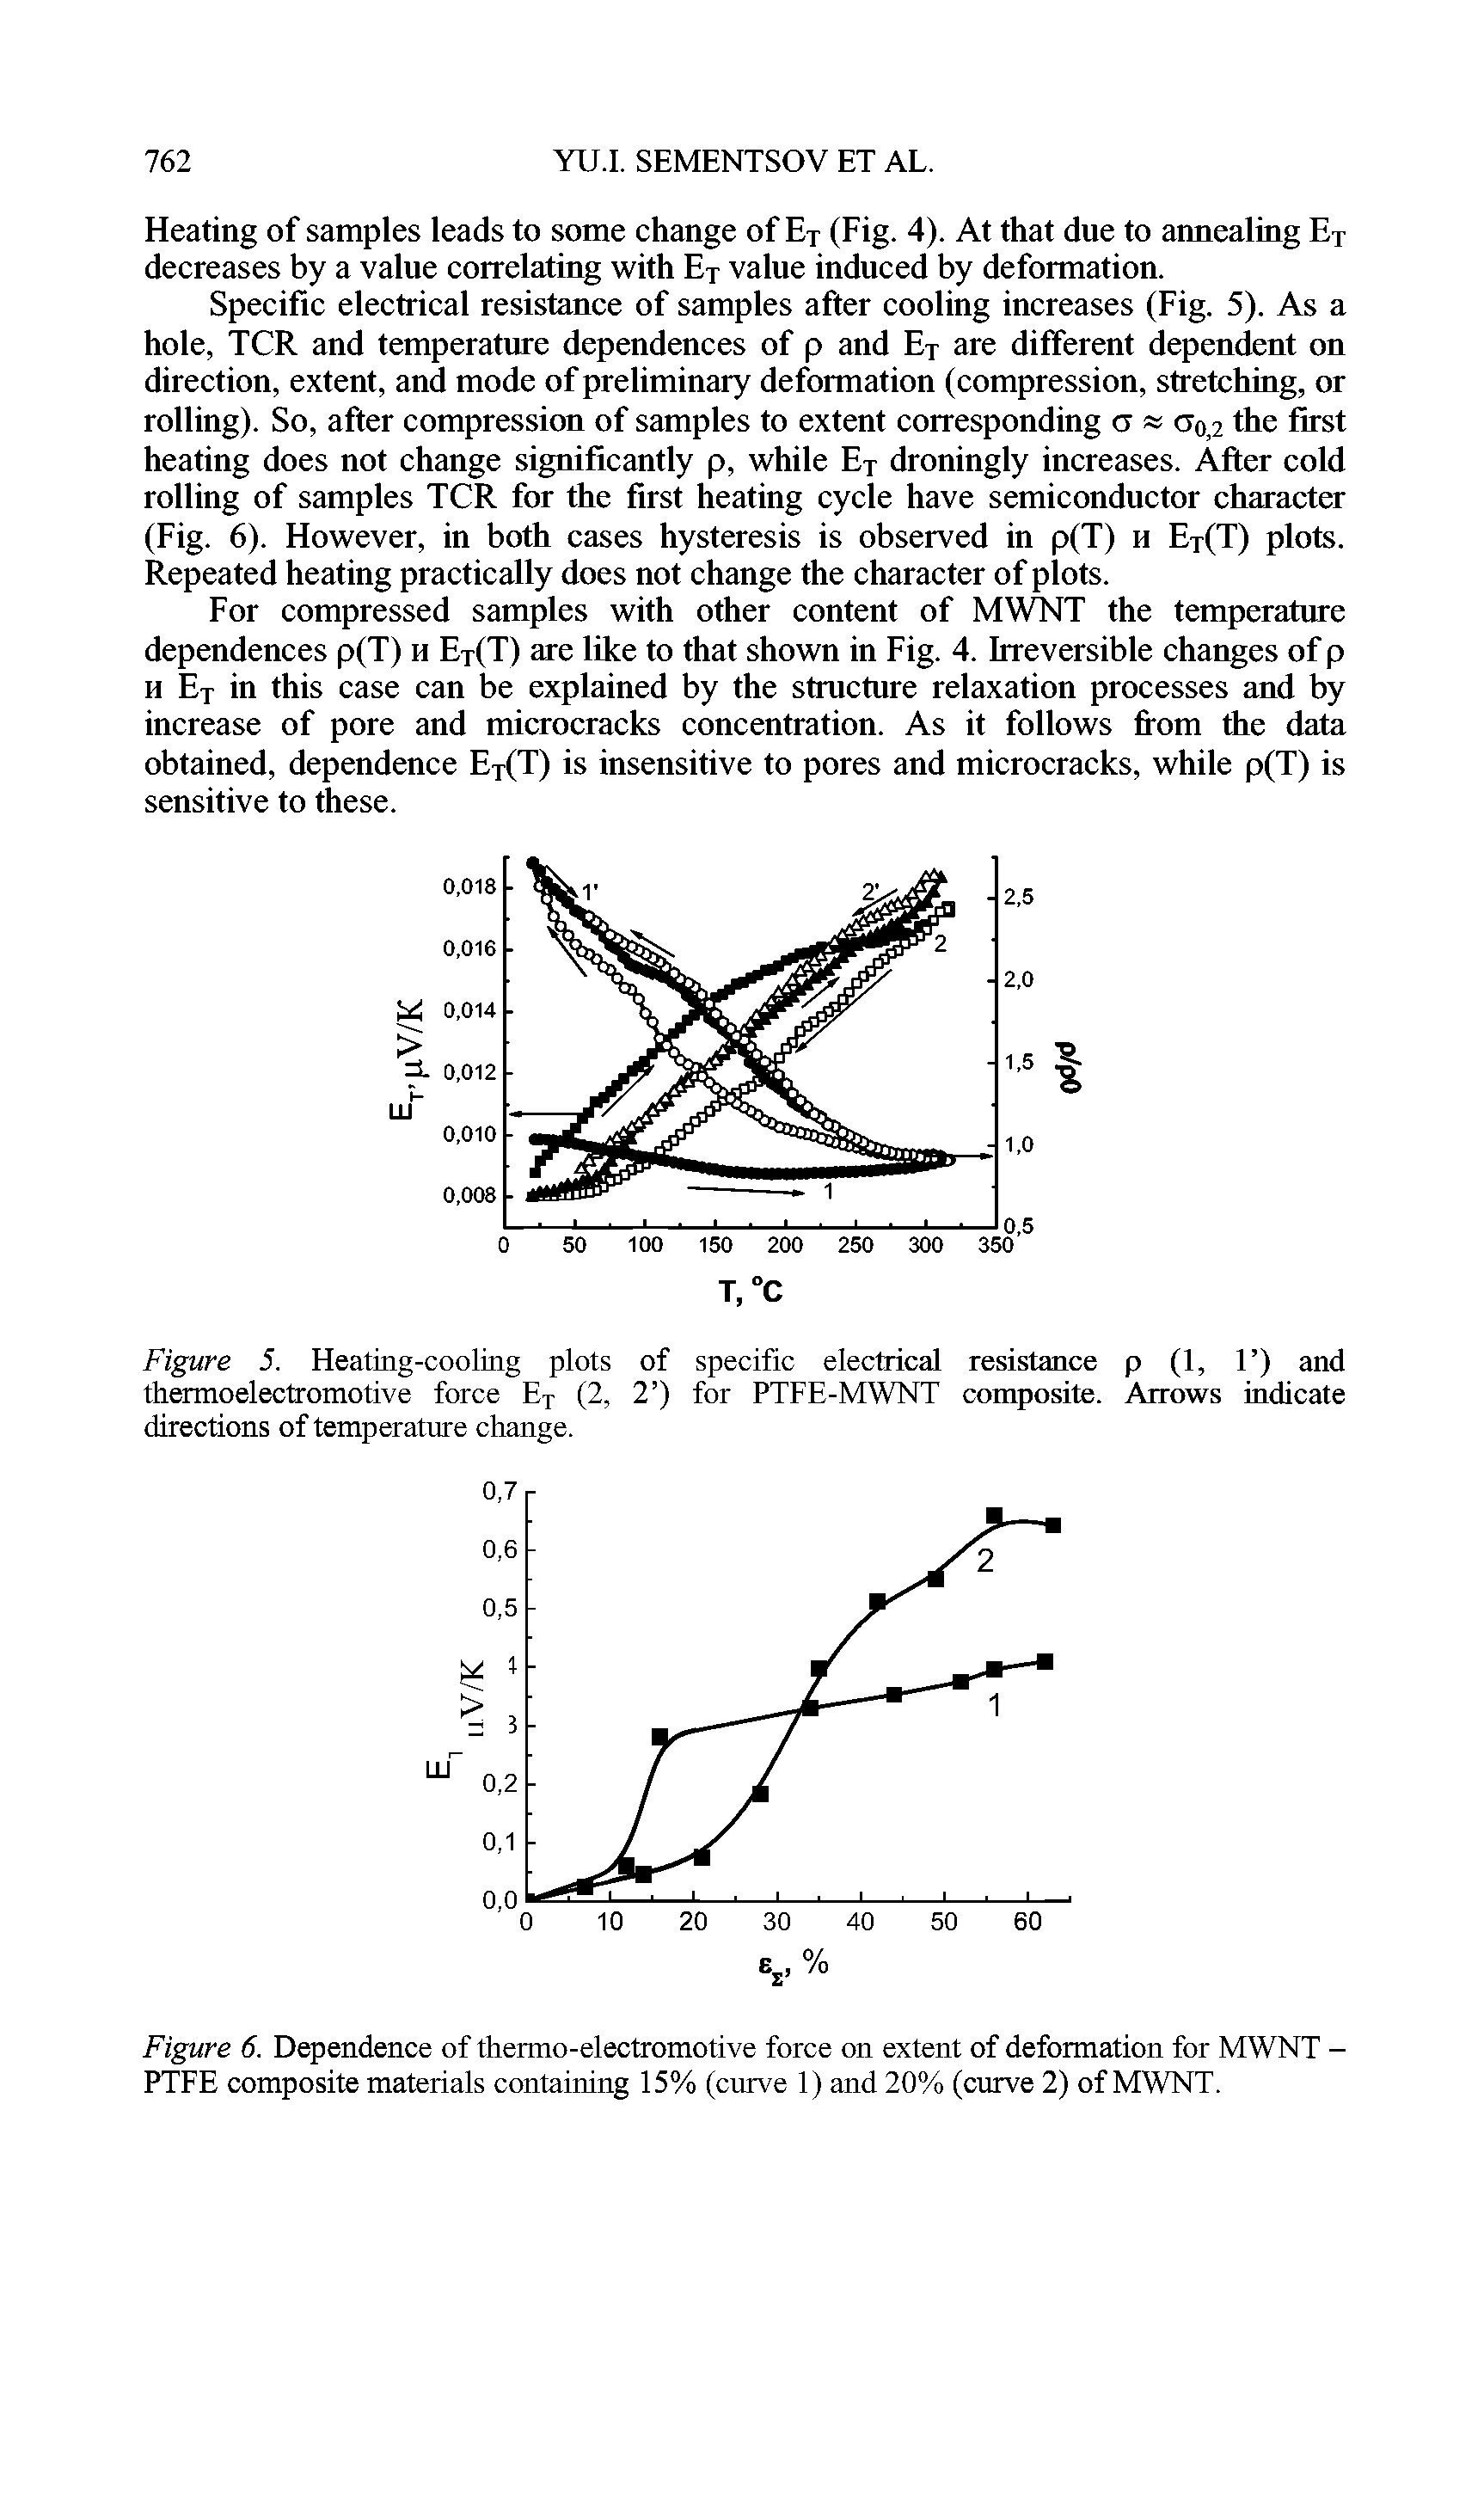 Figure 6. Dependence of thermo-electromotive force on extent of deformation for MWNT -PTFE composite materials containing 15% (curve 1) and 20% (curve 2) of MWNT.